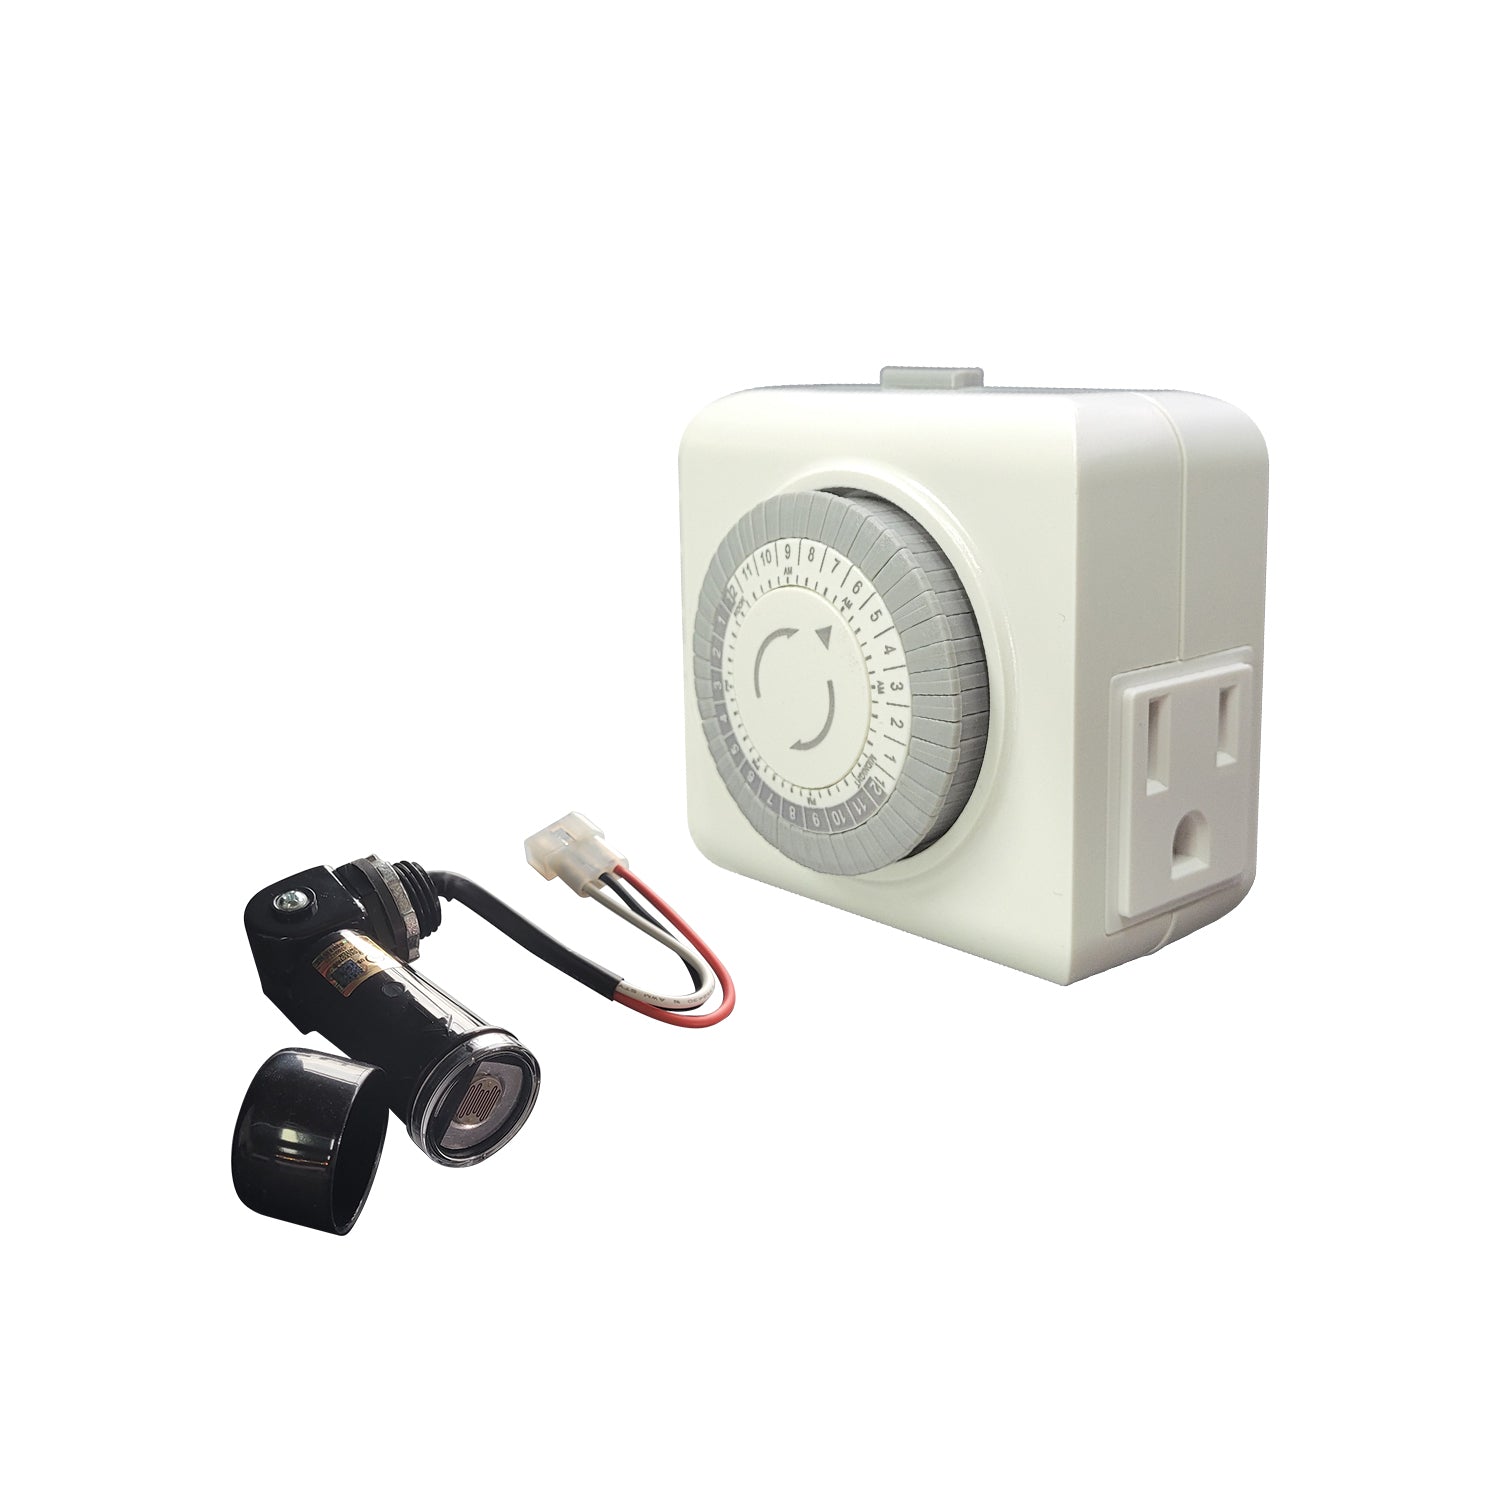 Photocell and Mechanical Timer for Low Voltage Transformer